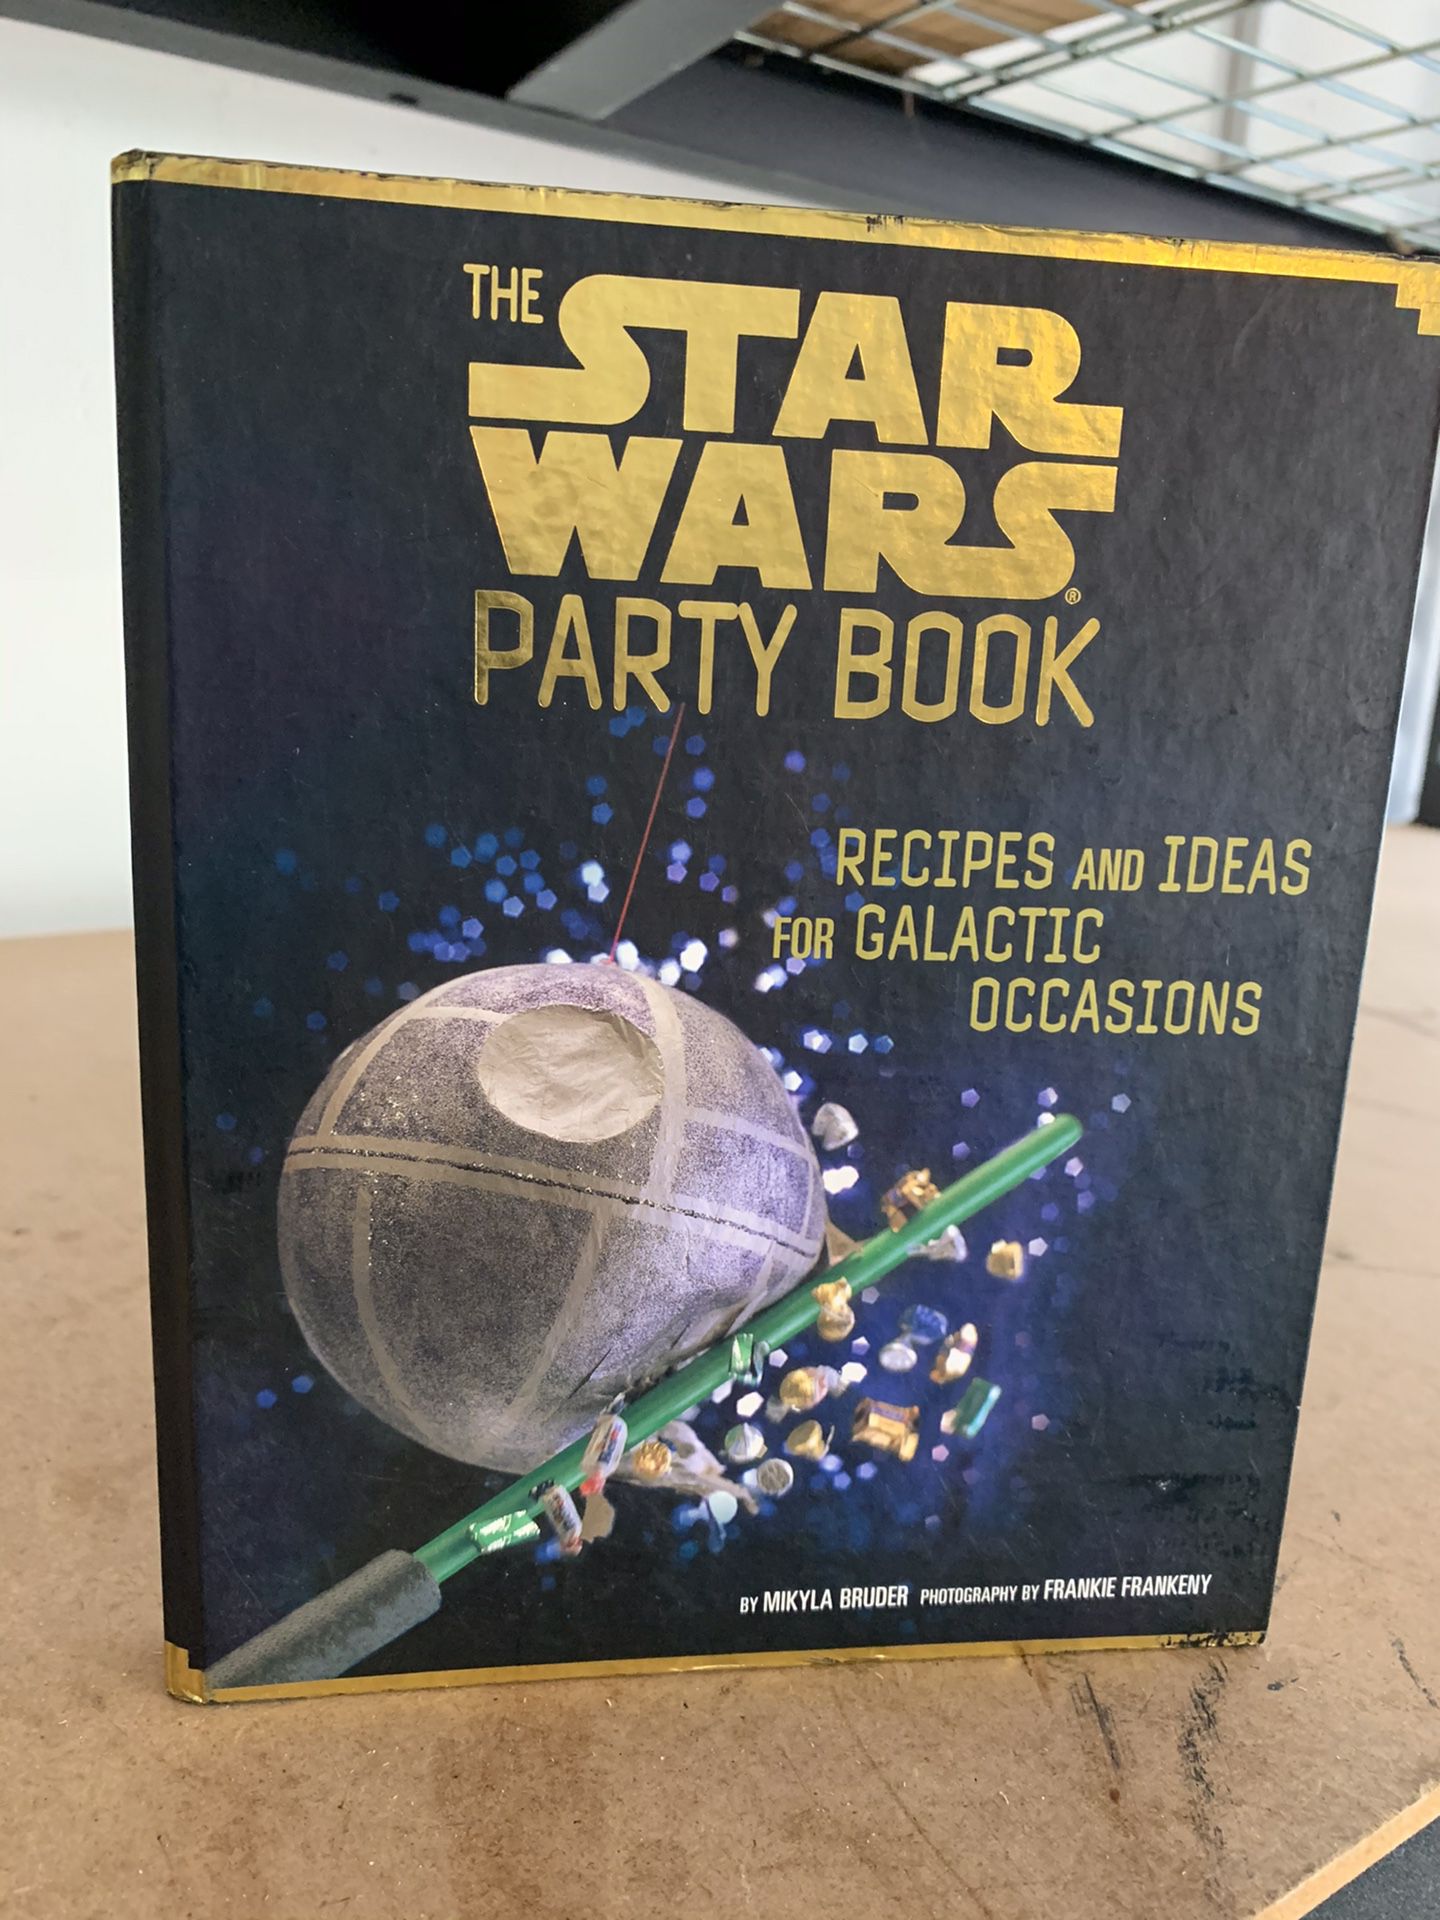 Star Wars Party and recipe book